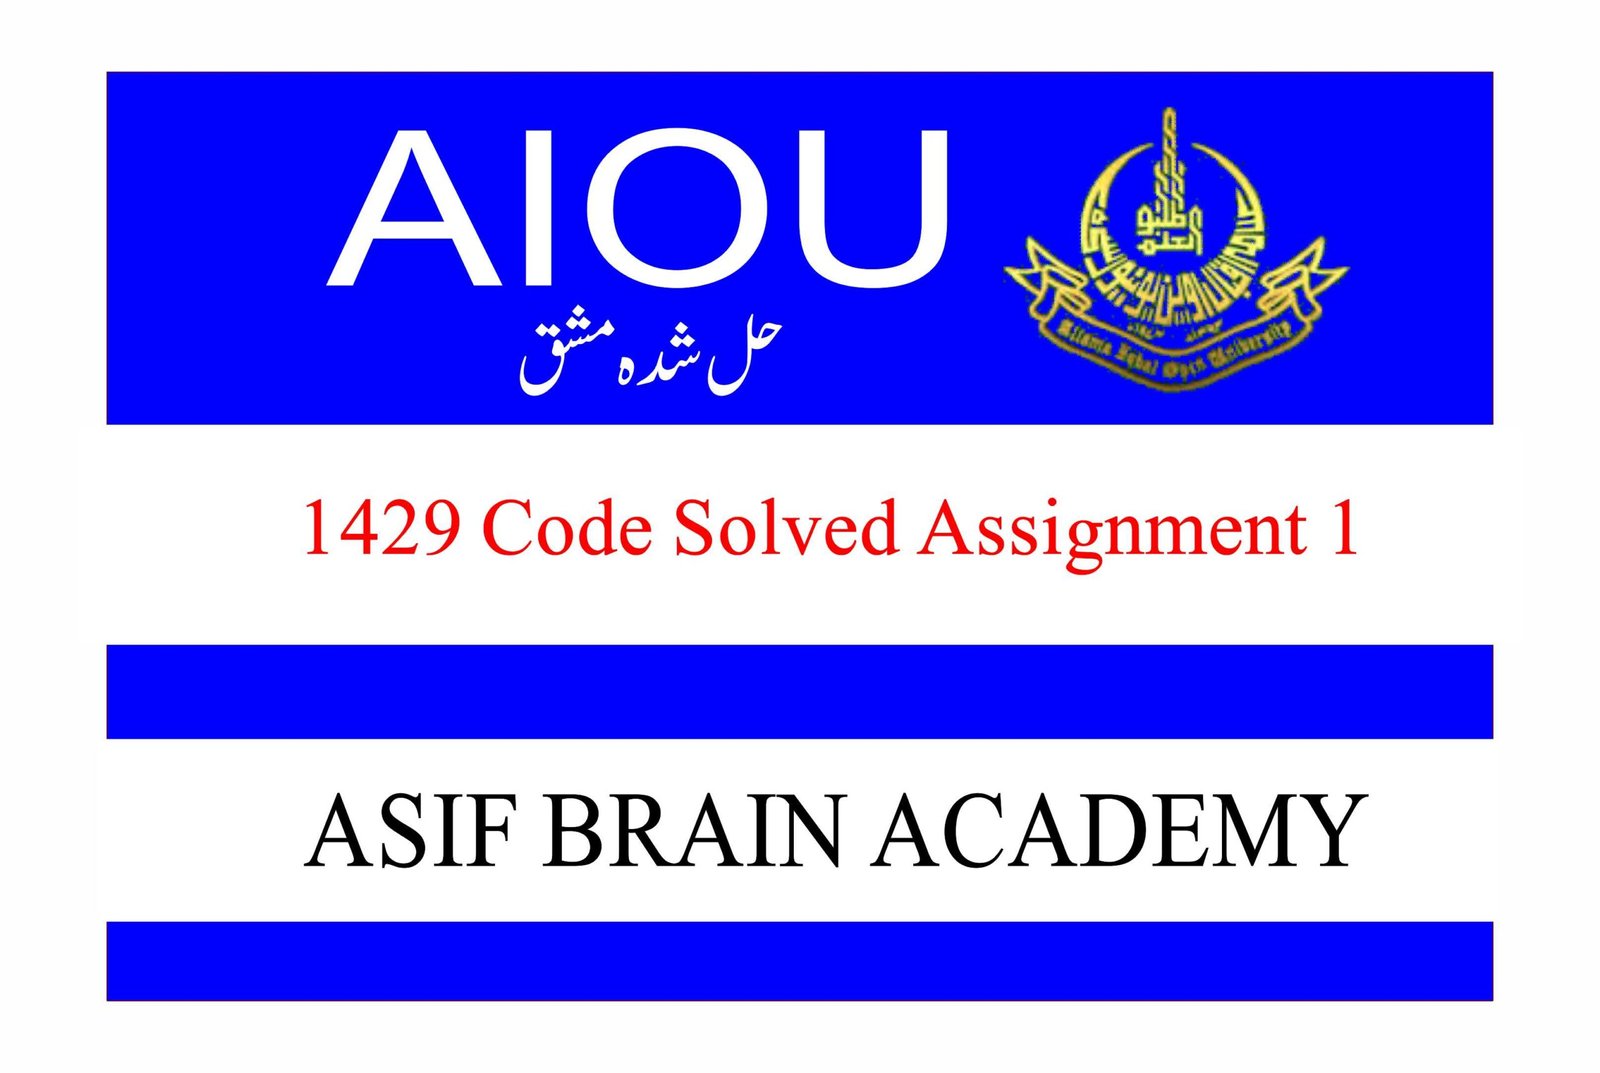 aiou-1429-code-solved-assignment-1